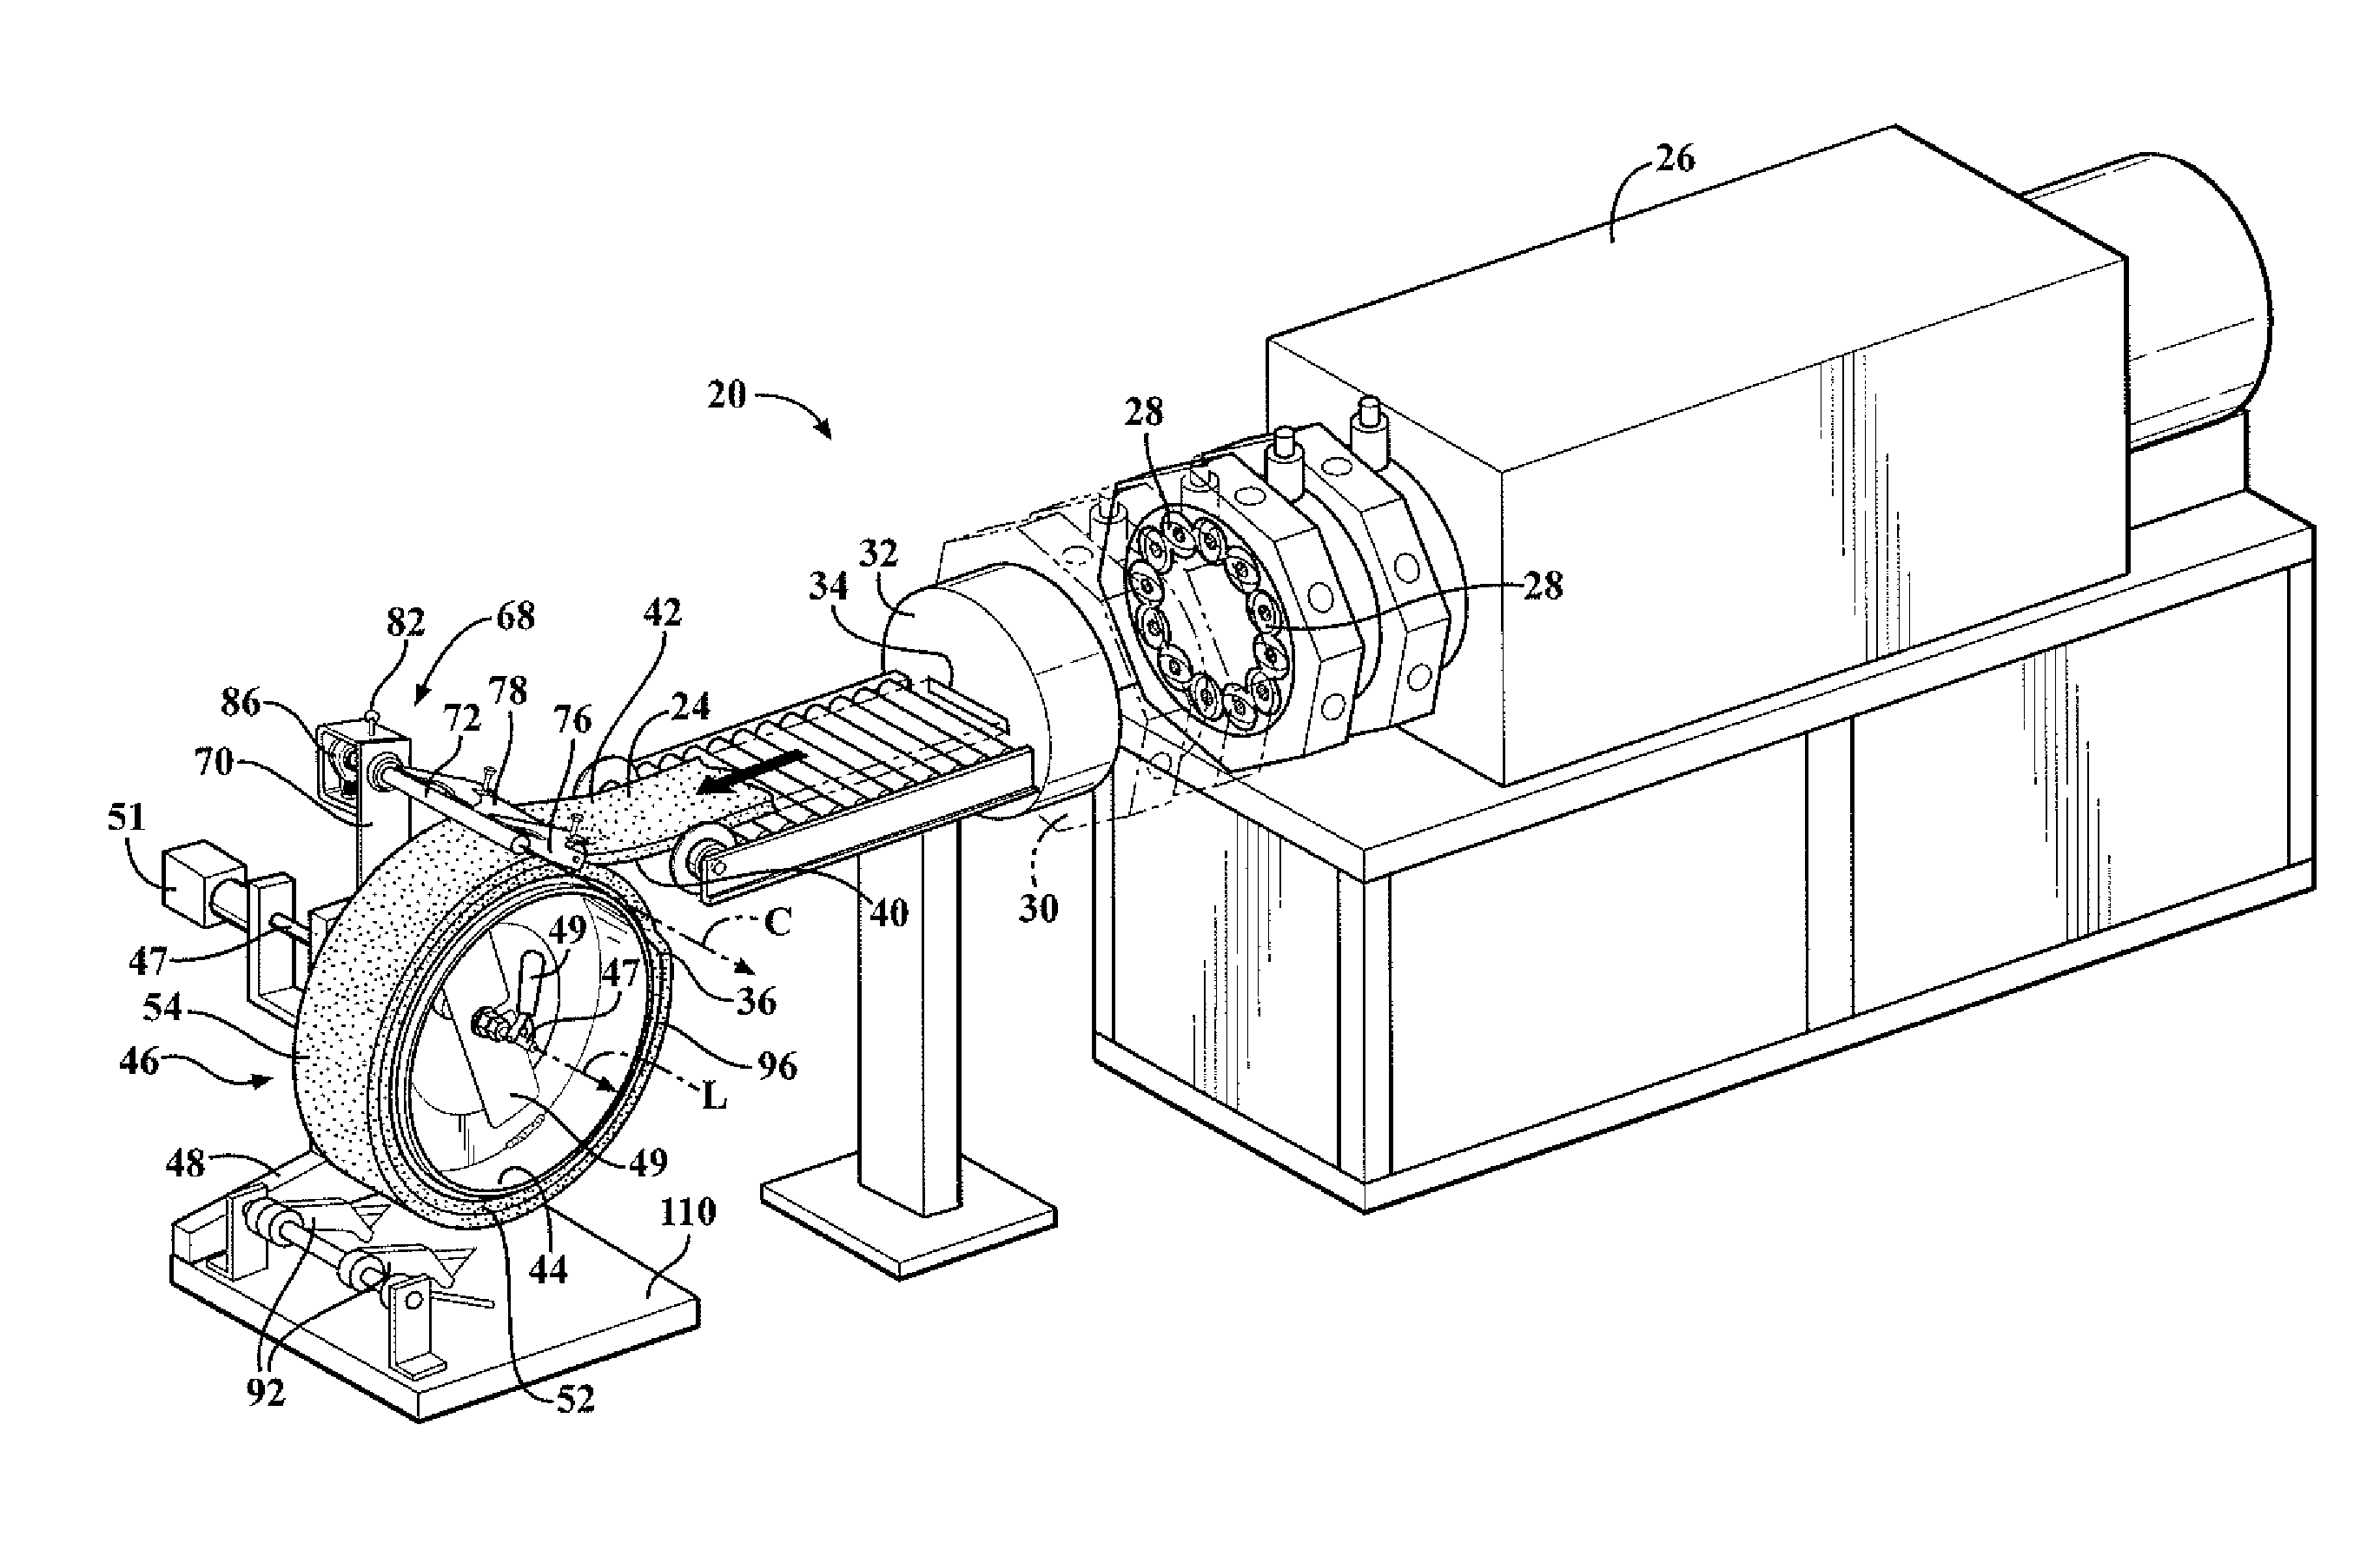 Manufacturing Apparatus And Method Of Forming A Preform